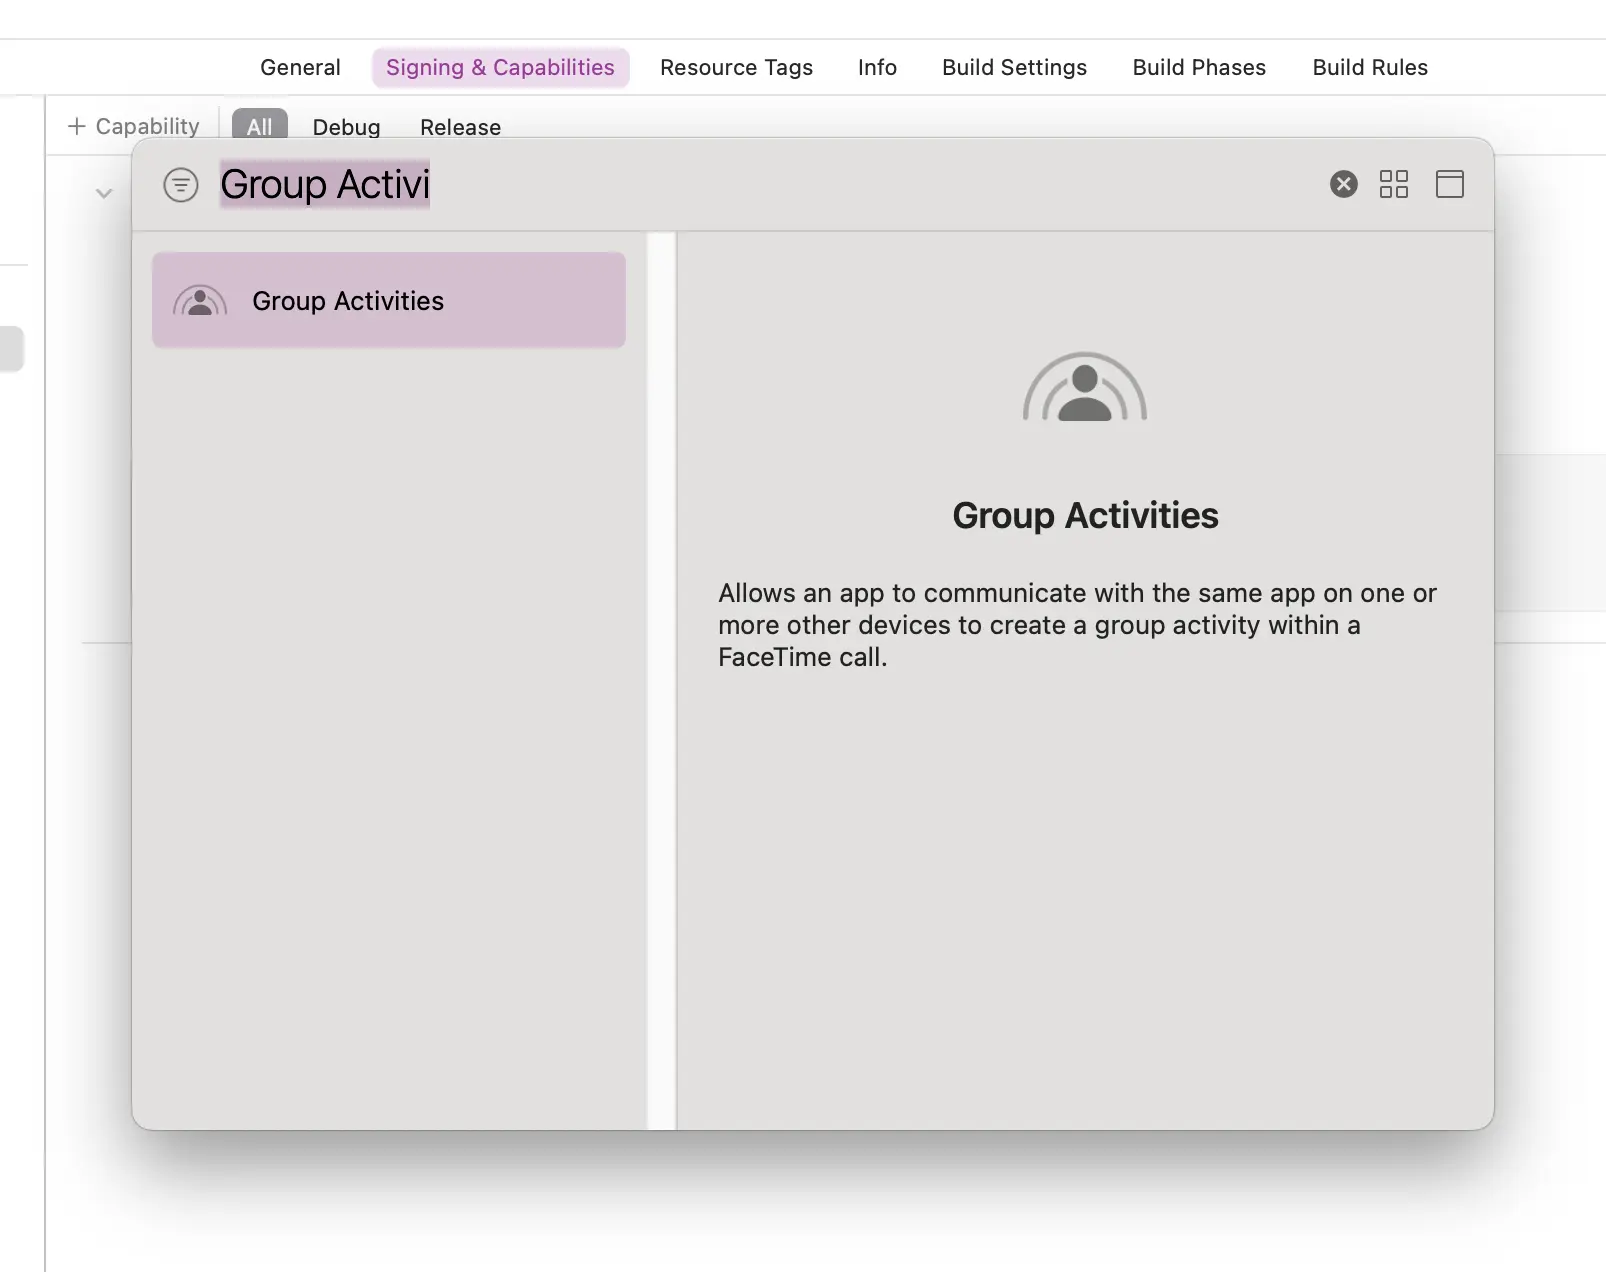 Selecting the Group Activities capability from the target's capability menu in Xcode